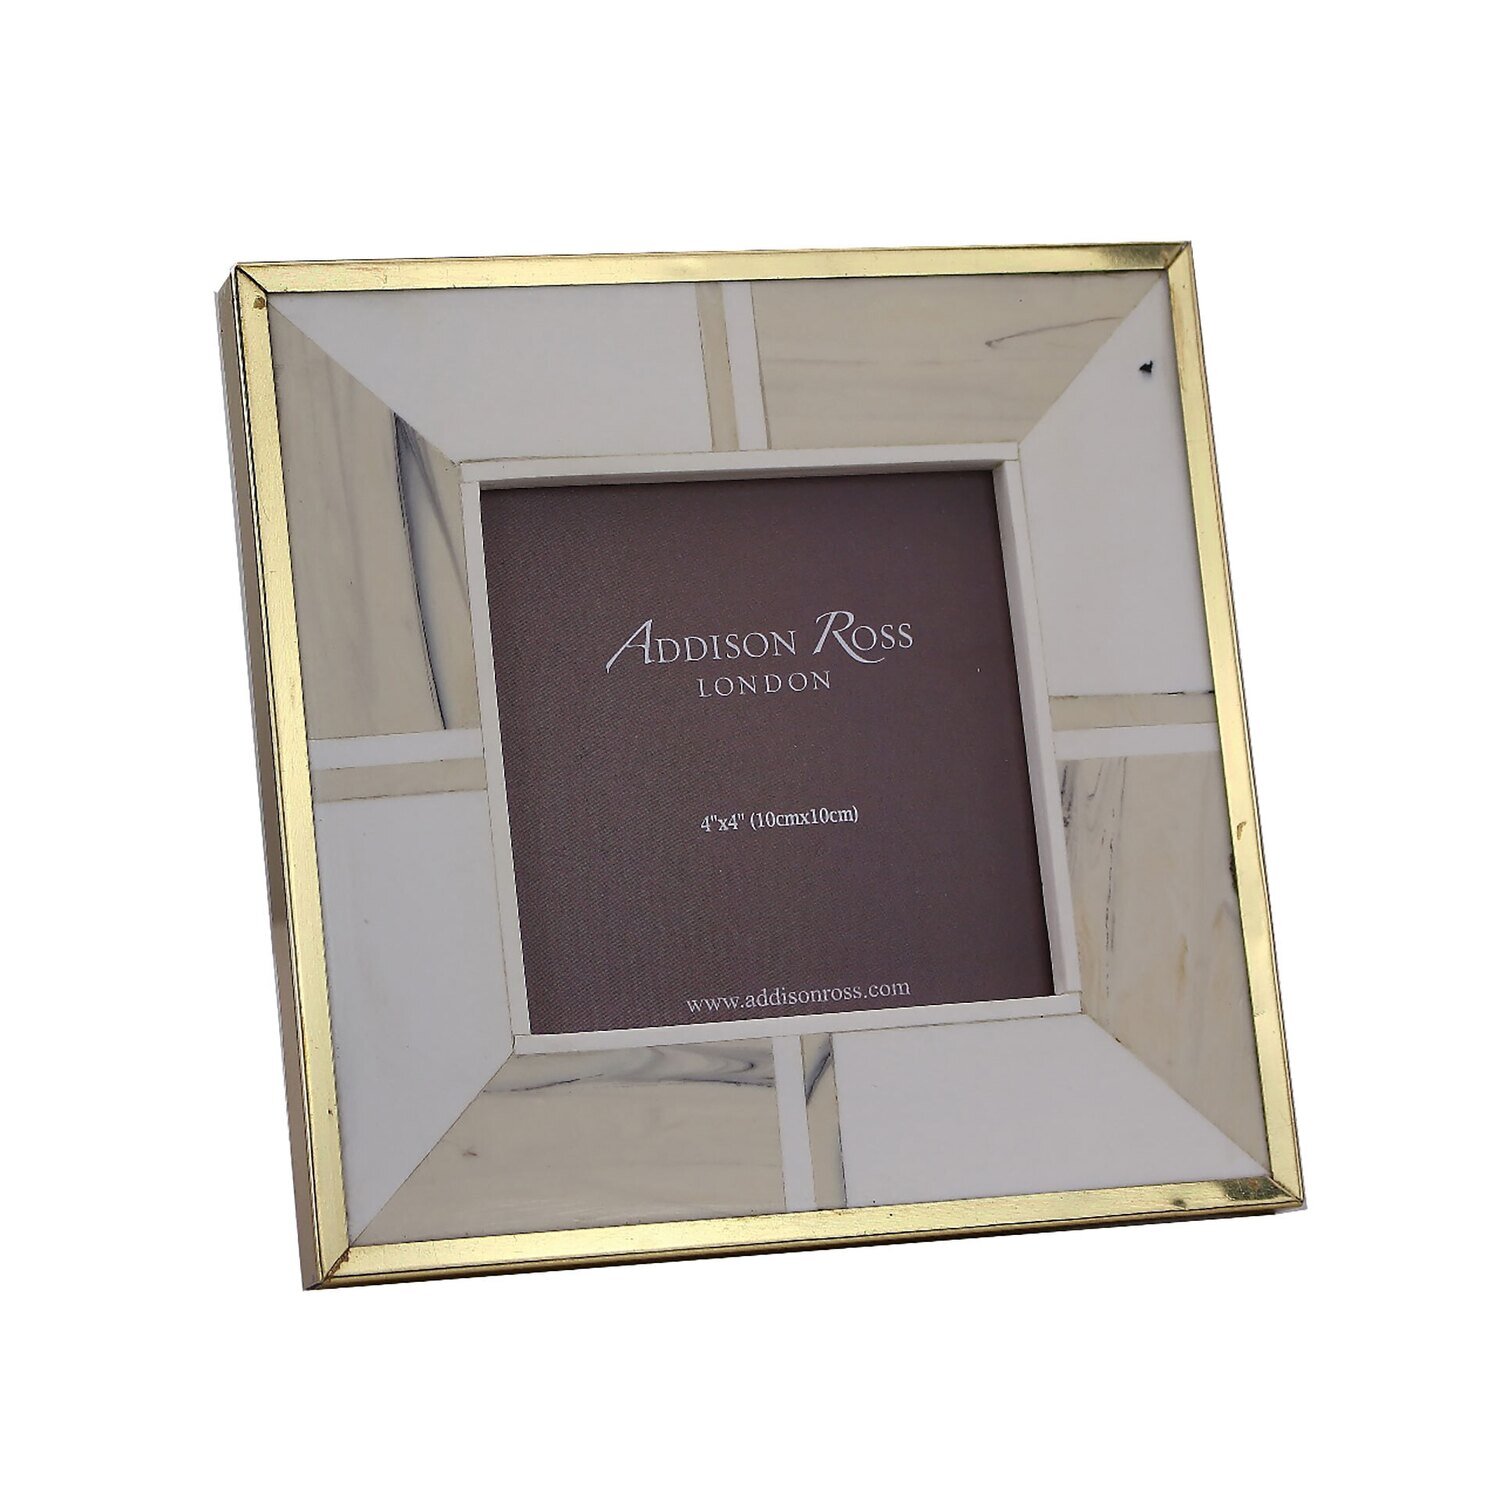 Addison Ross 4 x 4 Inch Cream with Brass Border Picture Frame Bone FR6703